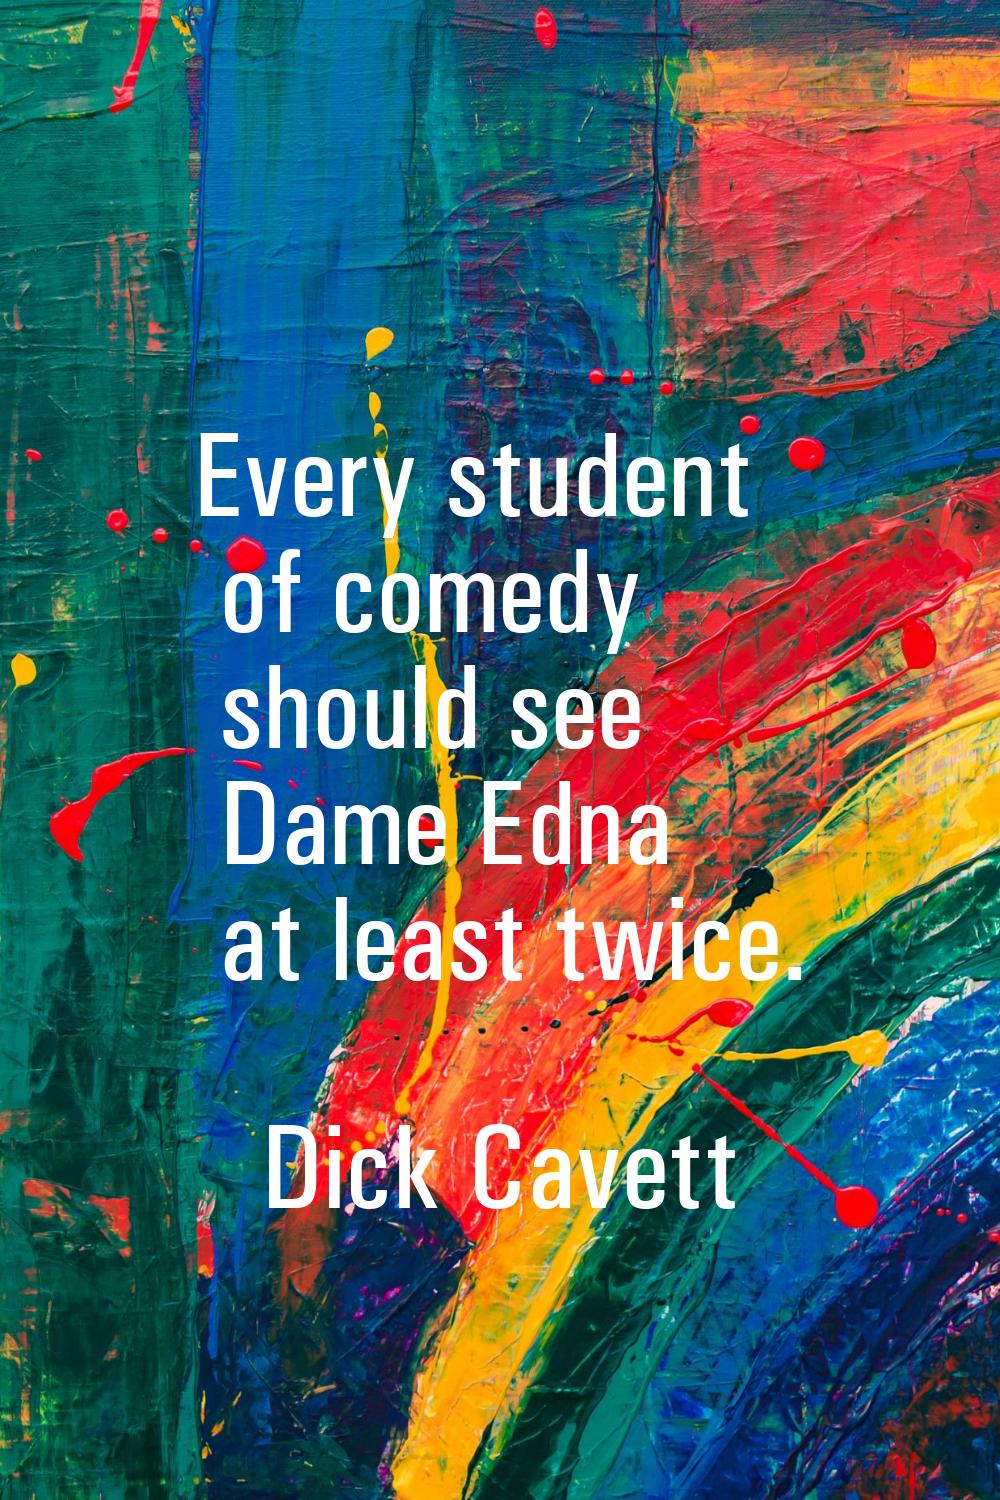 Every student of comedy should see Dame Edna at least twice.